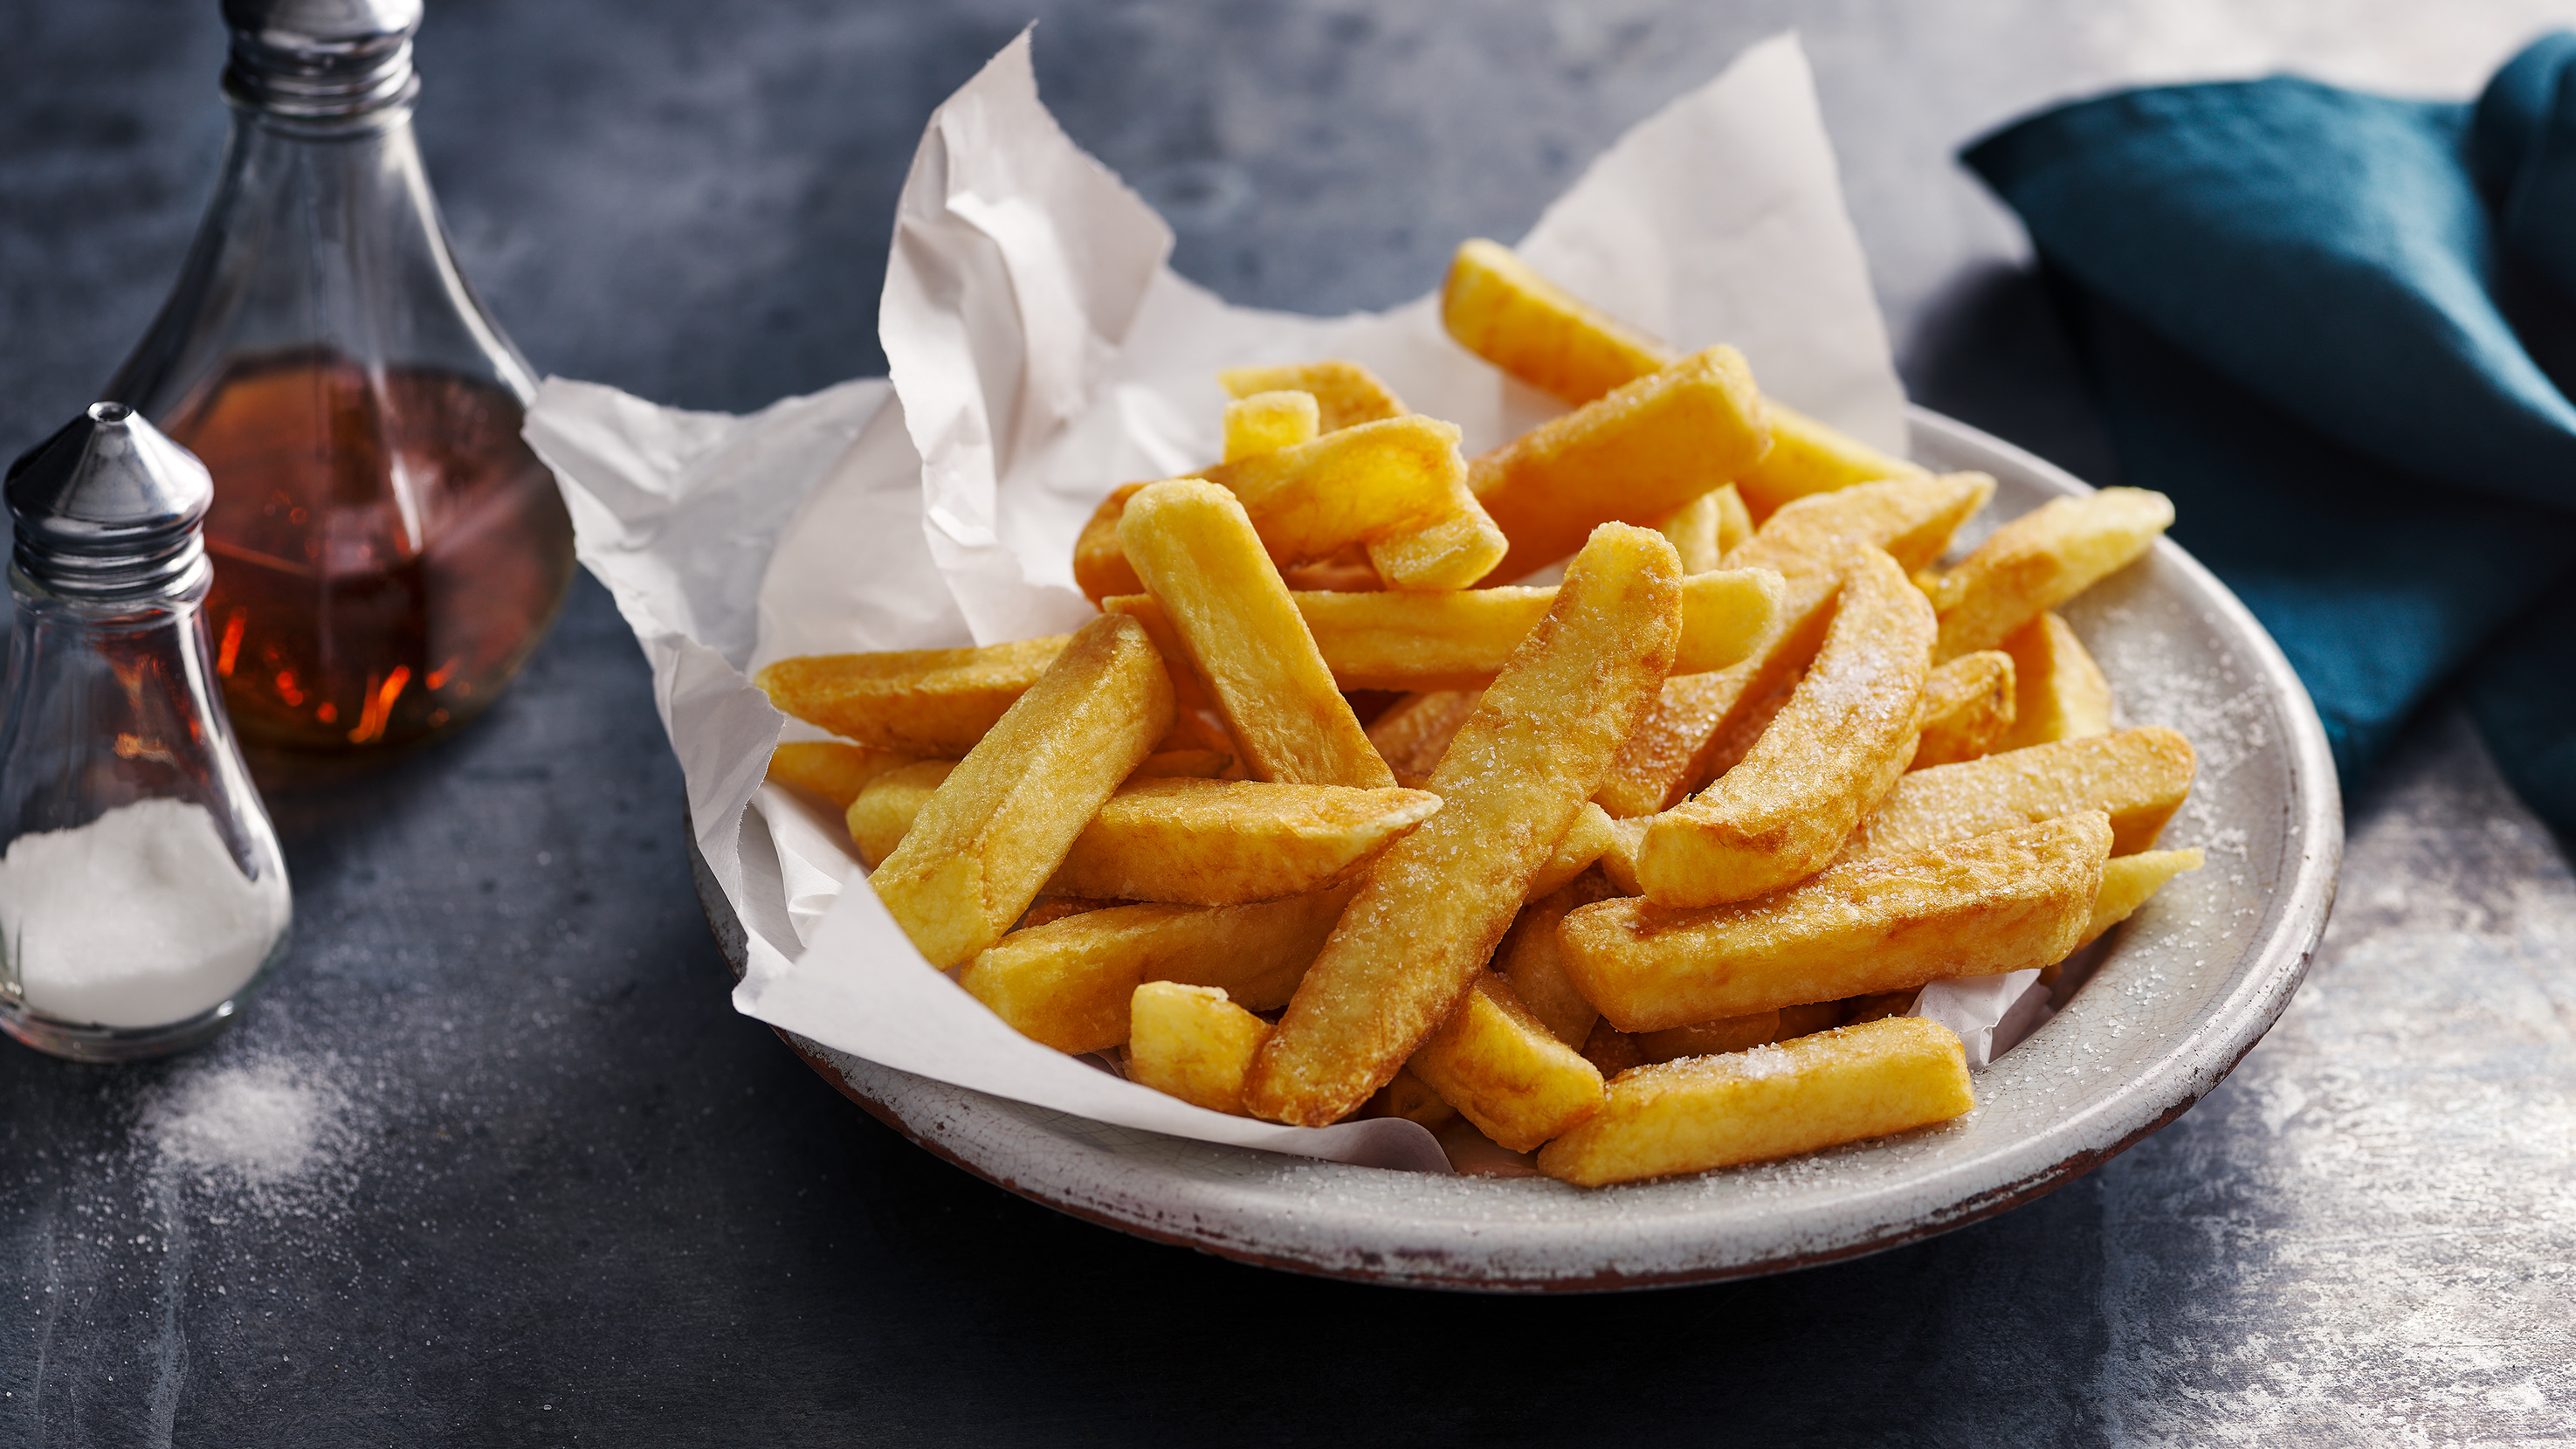 triple-cooked_chips_66210_16x9.jpg